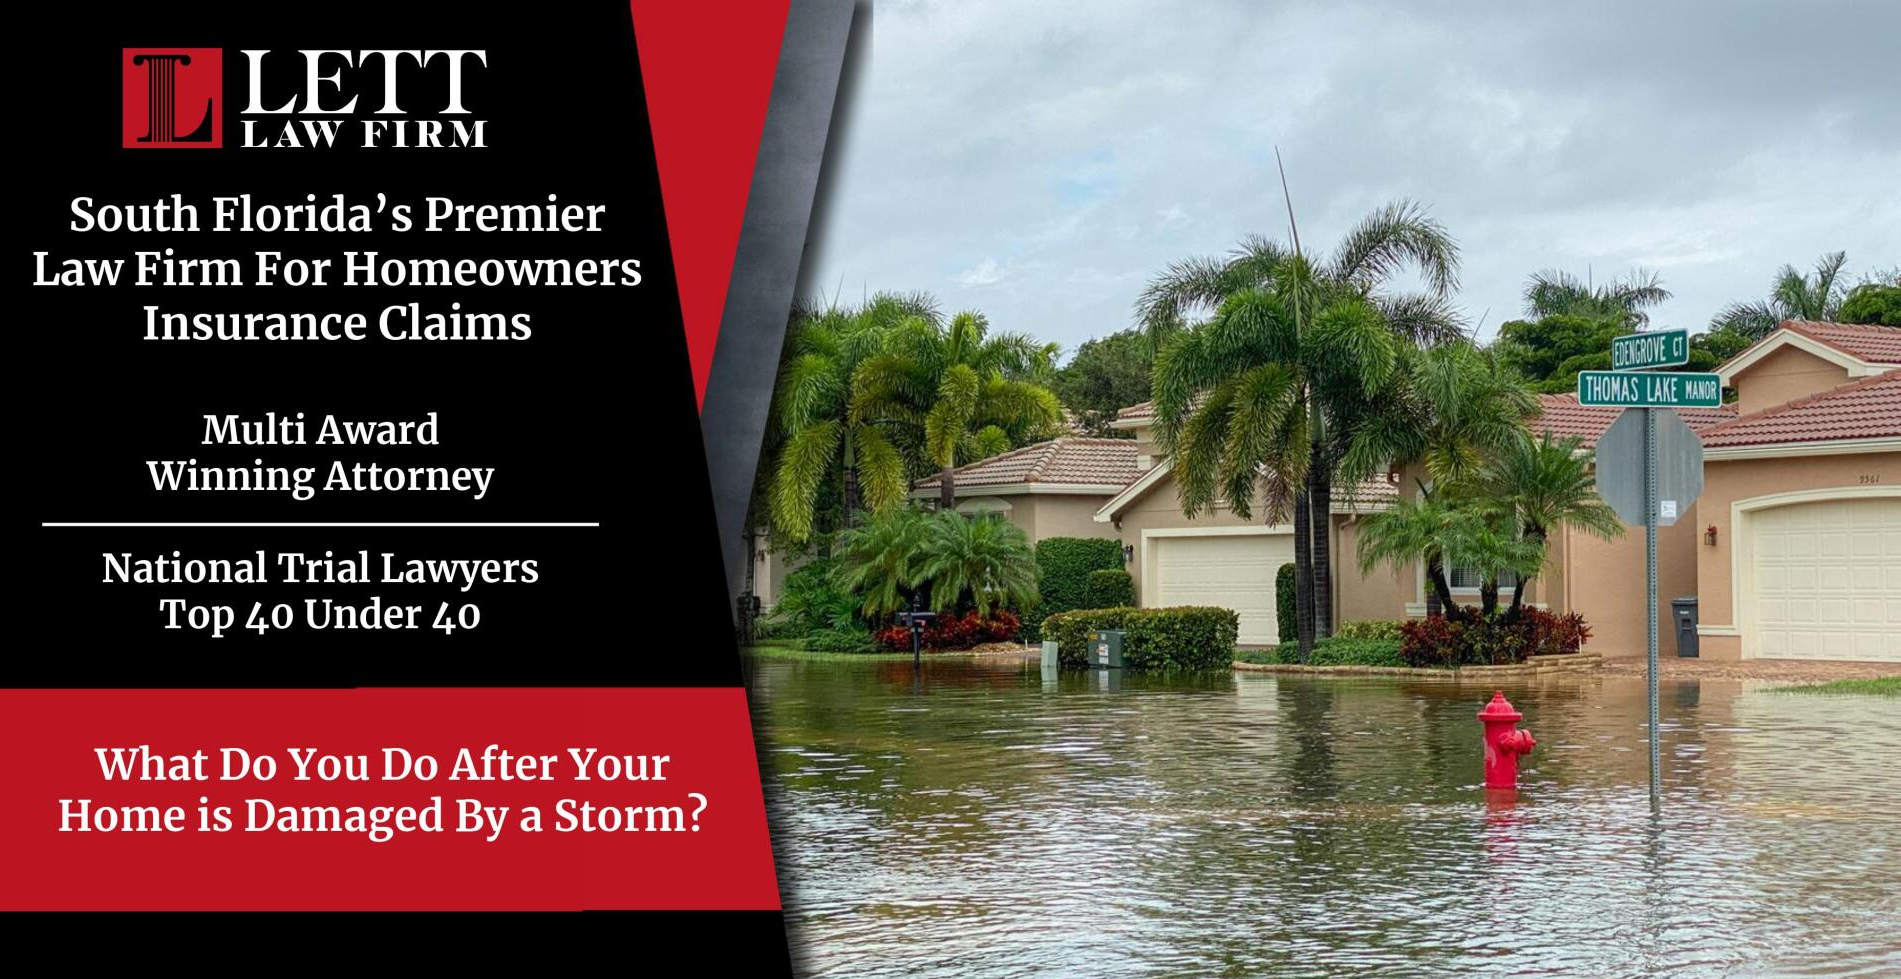 Miami Homeowners Insurance Lawyer - What Do You Do After Your Home Is Damaged By A Storm?